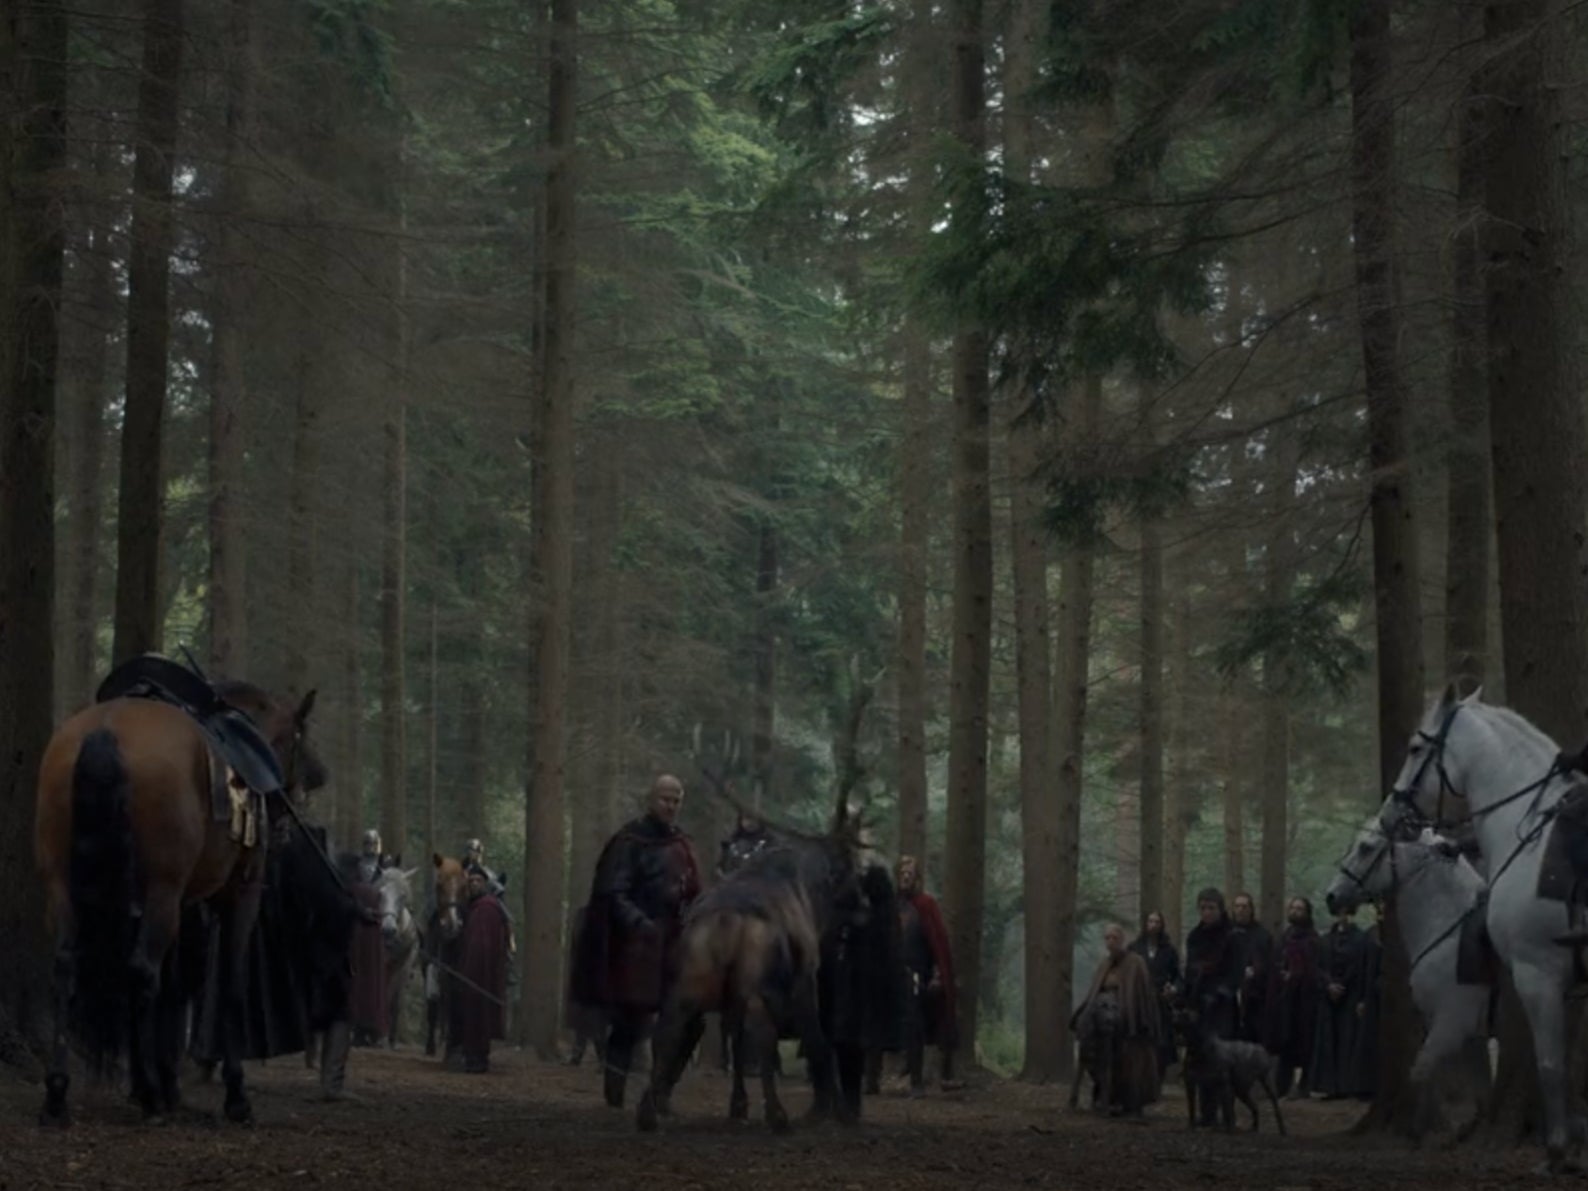 King Viserys’s hunting party was much more bustling than the one featured in ‘Game of Thrones’